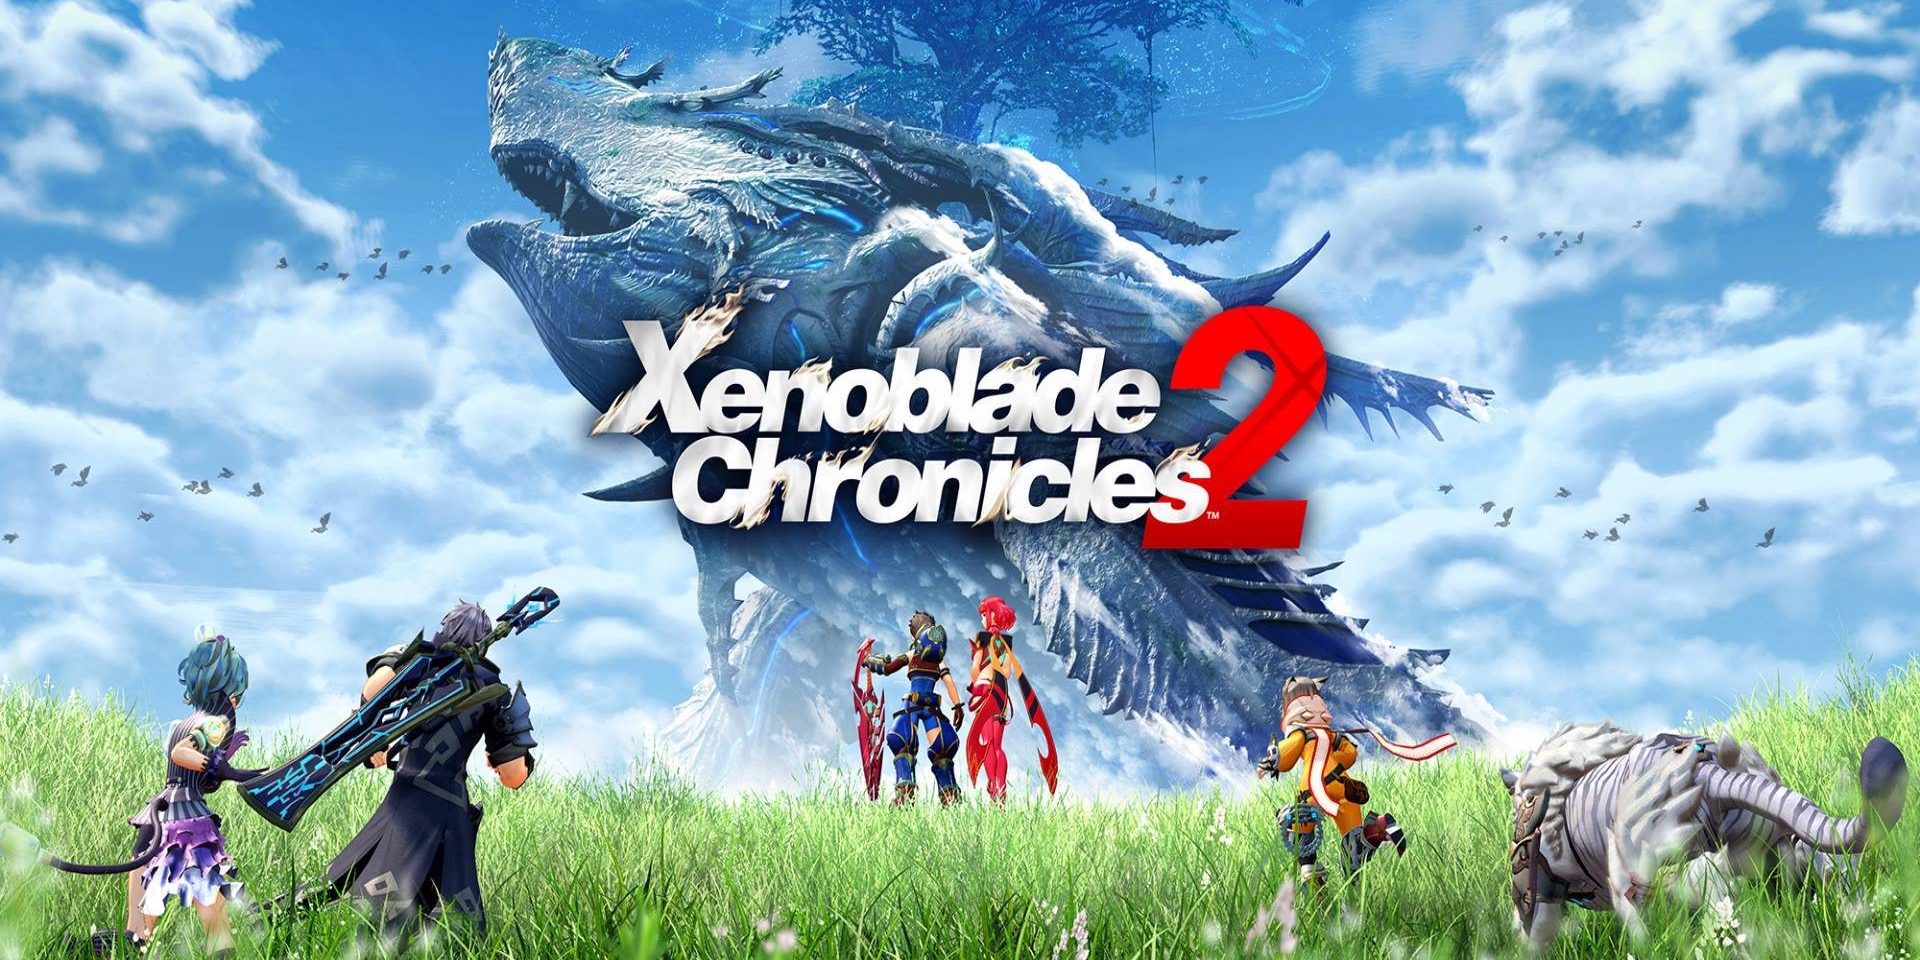 Today's Best Game Deals Xenoblade Chronicles 2 $40, MediEvil $20, more